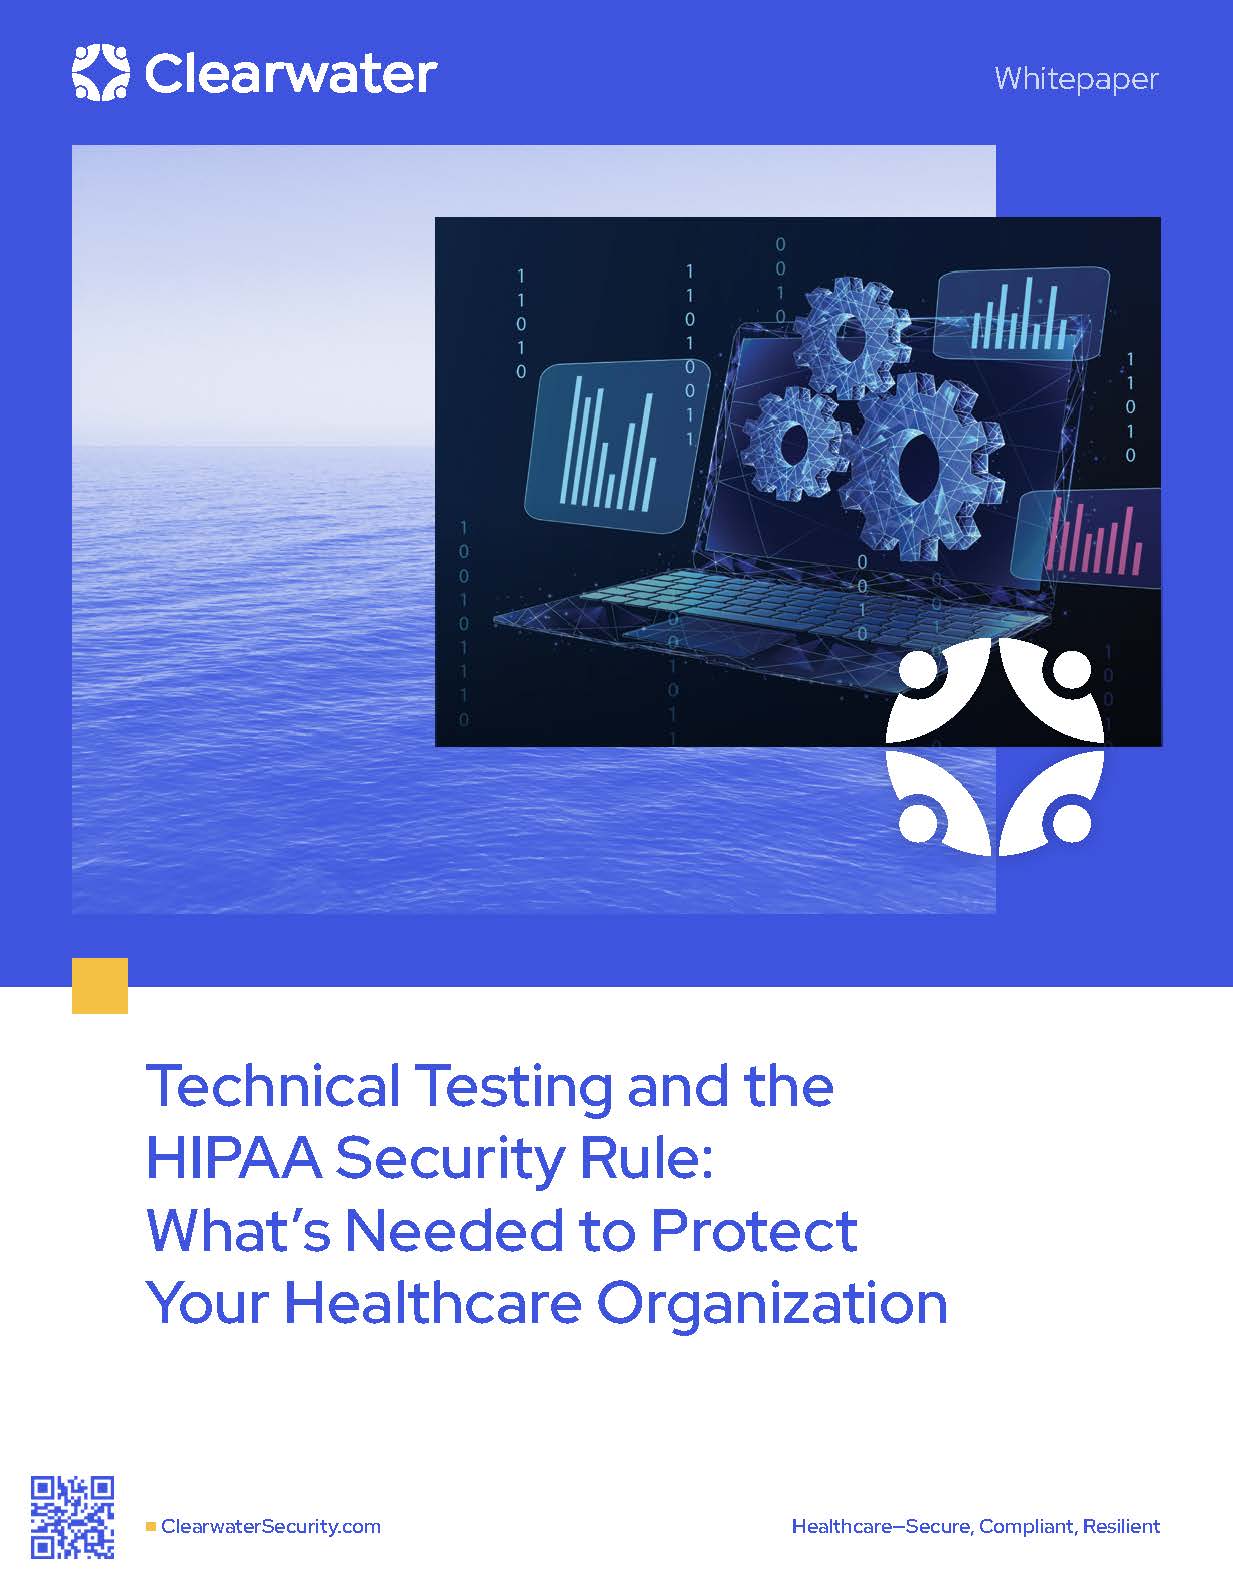 Technical Testing and the HIPAA Security Rule by Clearwater